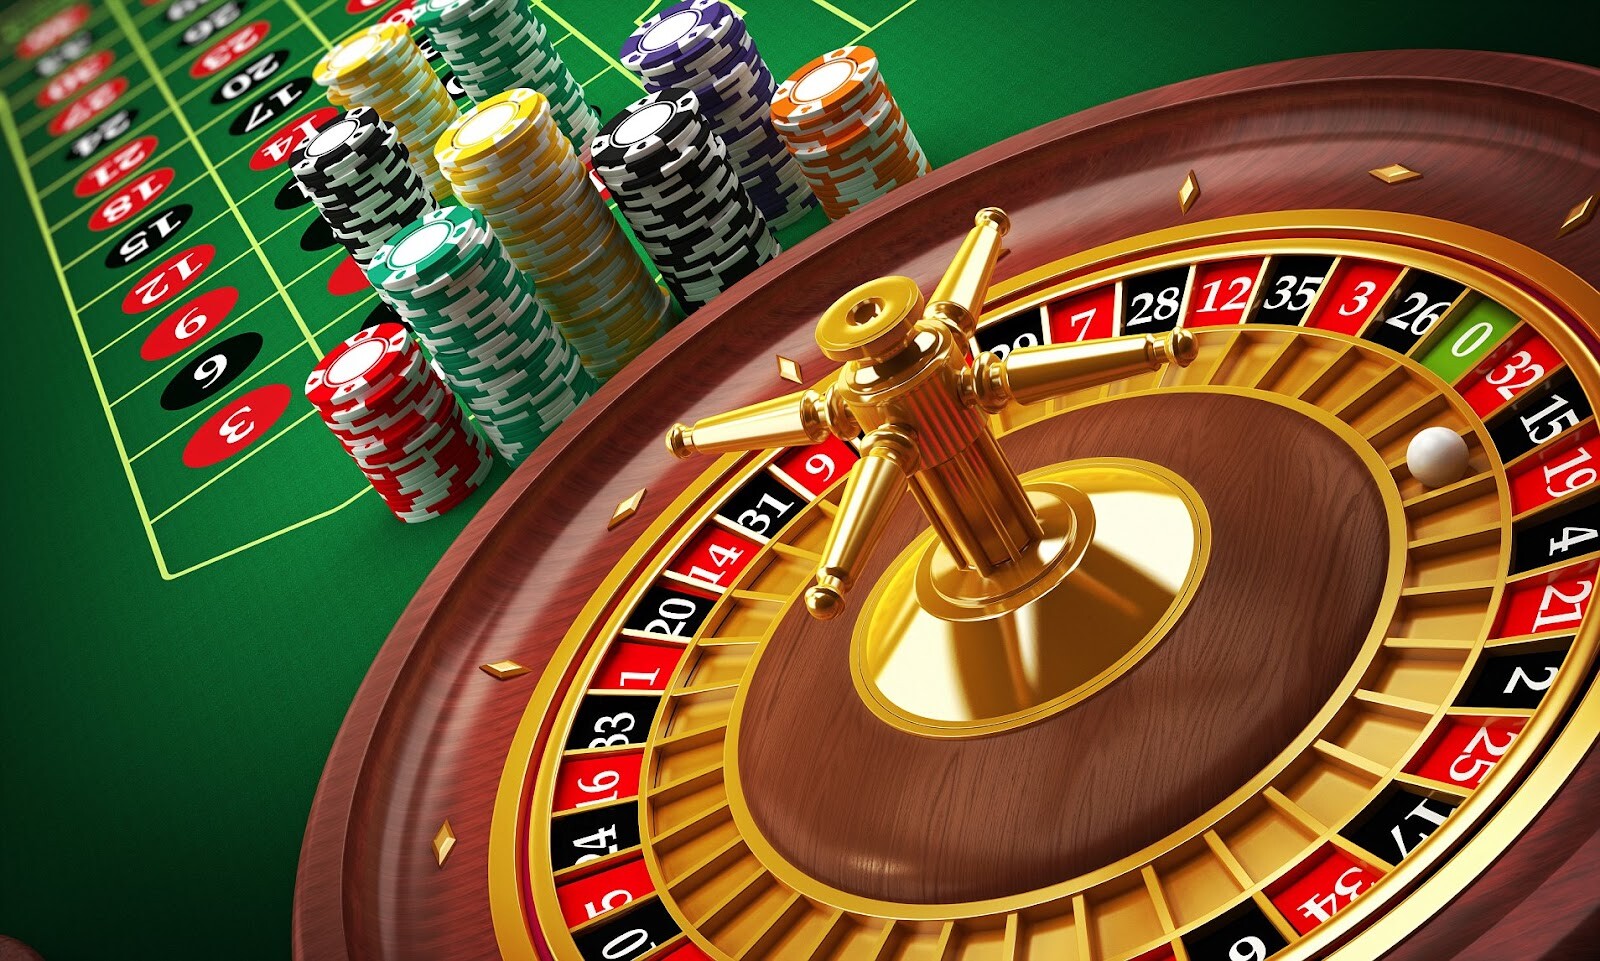 Roulette Wheel And Casino Chips On The Table.similar Images: